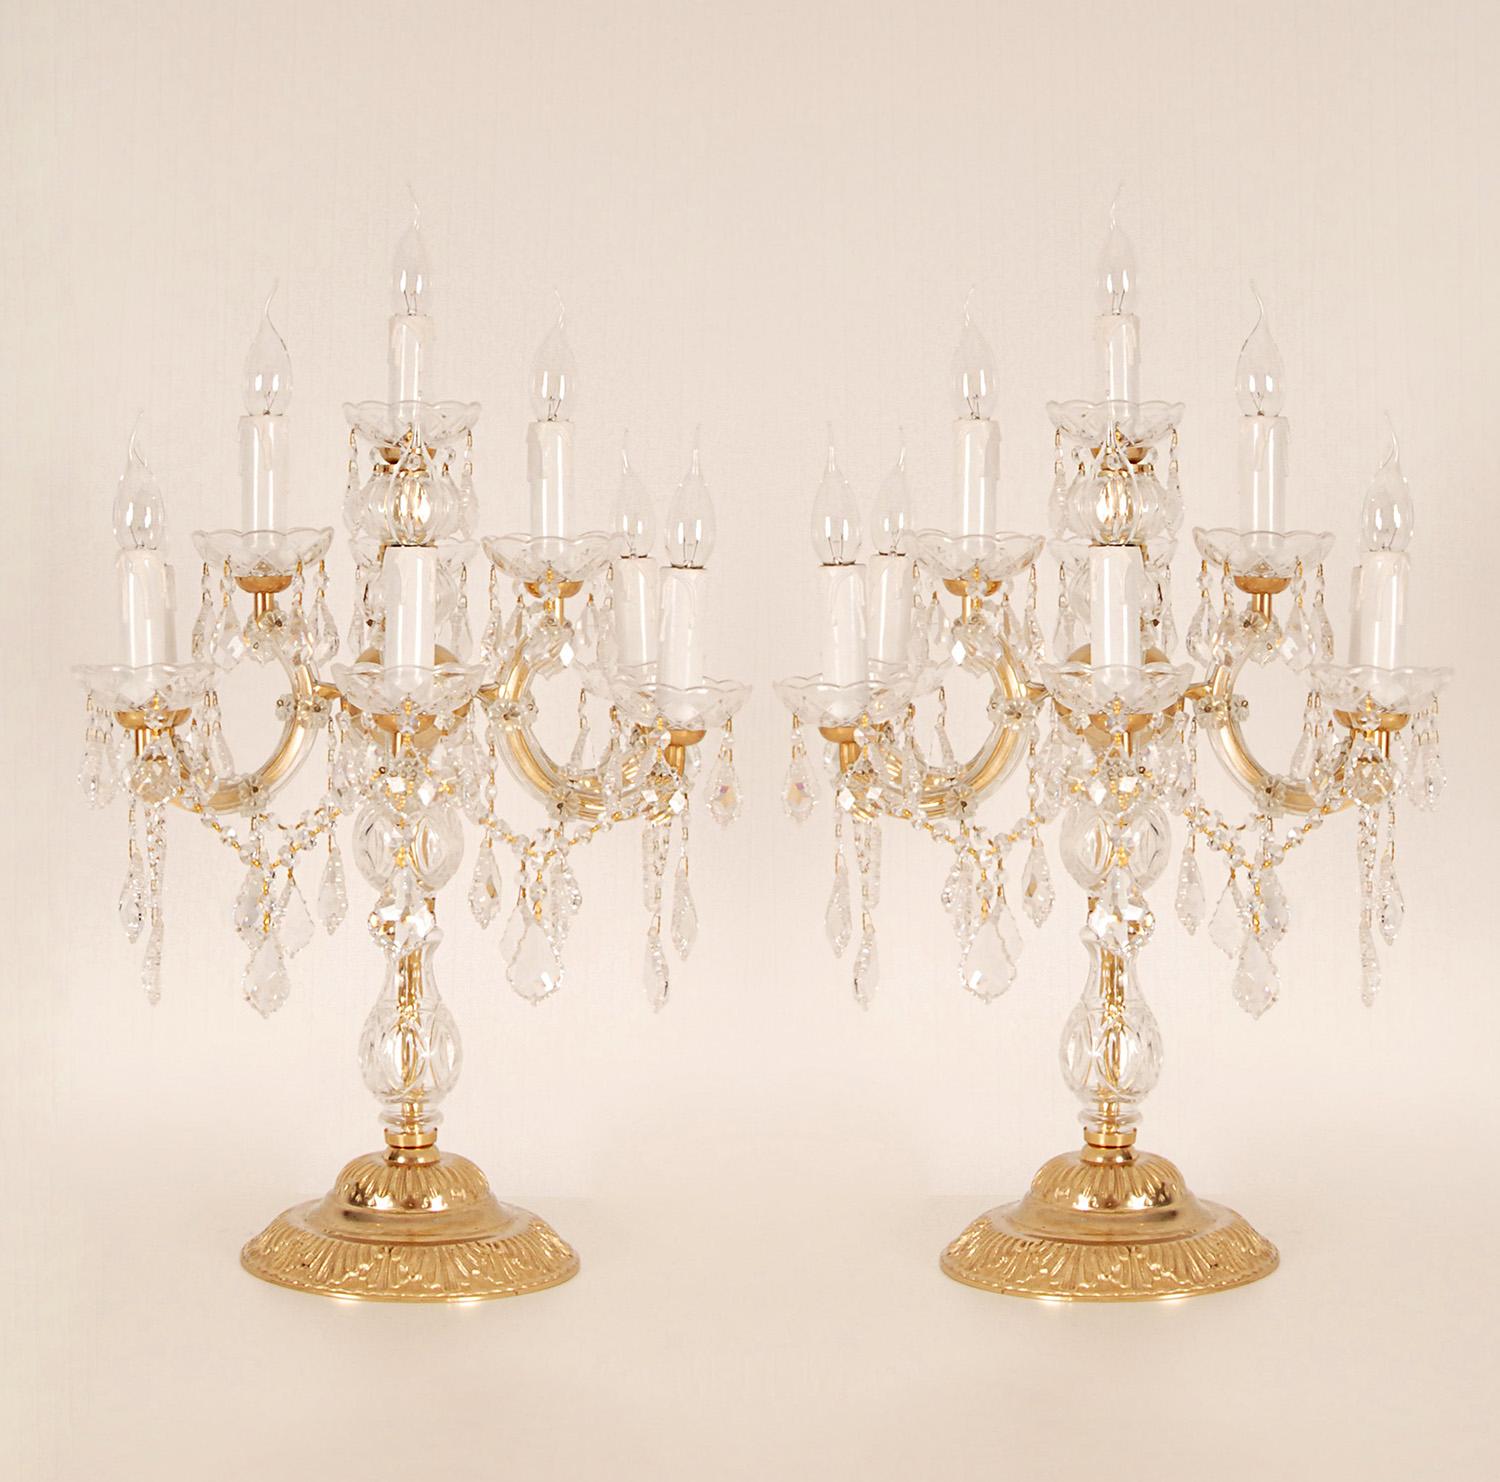 Vintage Italian Crystal lamps Girandoles Gold Gilded Bronze Table Lamps Pair For Sale 4